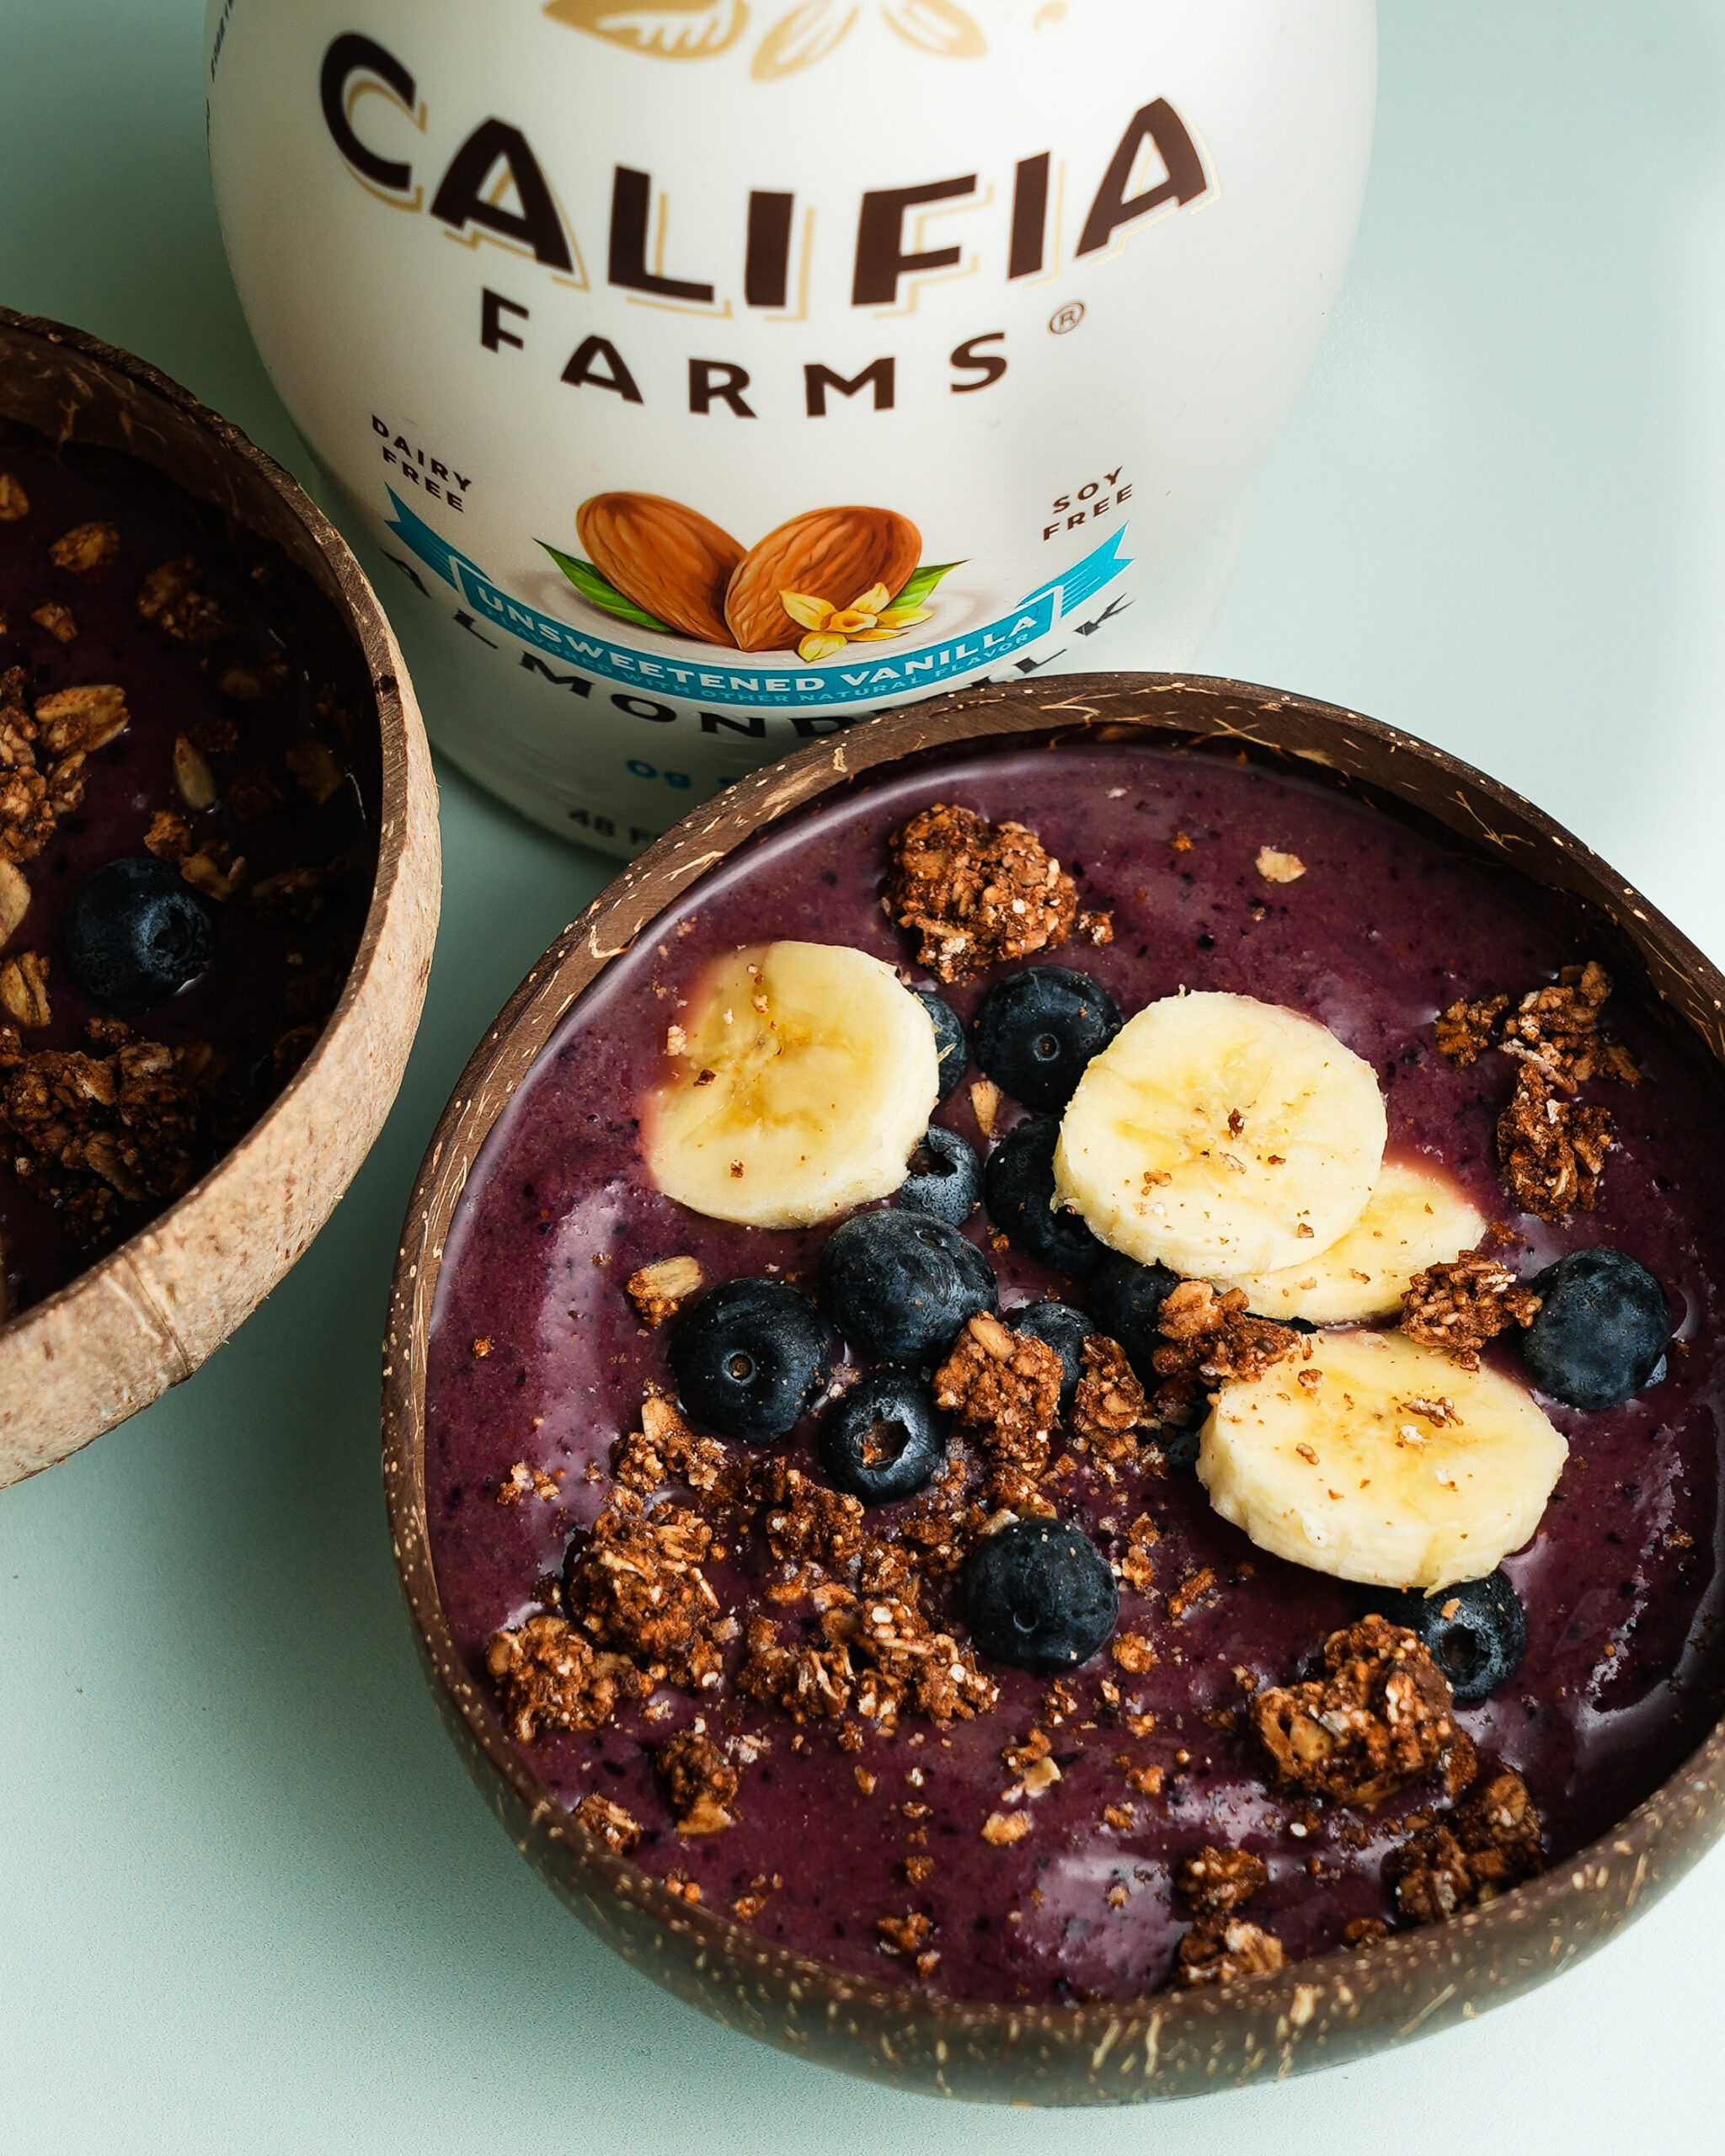 Acai bowl with chopped banana, blueberries, and granola sits in the front of the image, with Califia Farms Unsweetened Vanilla Almondmilk in the back.